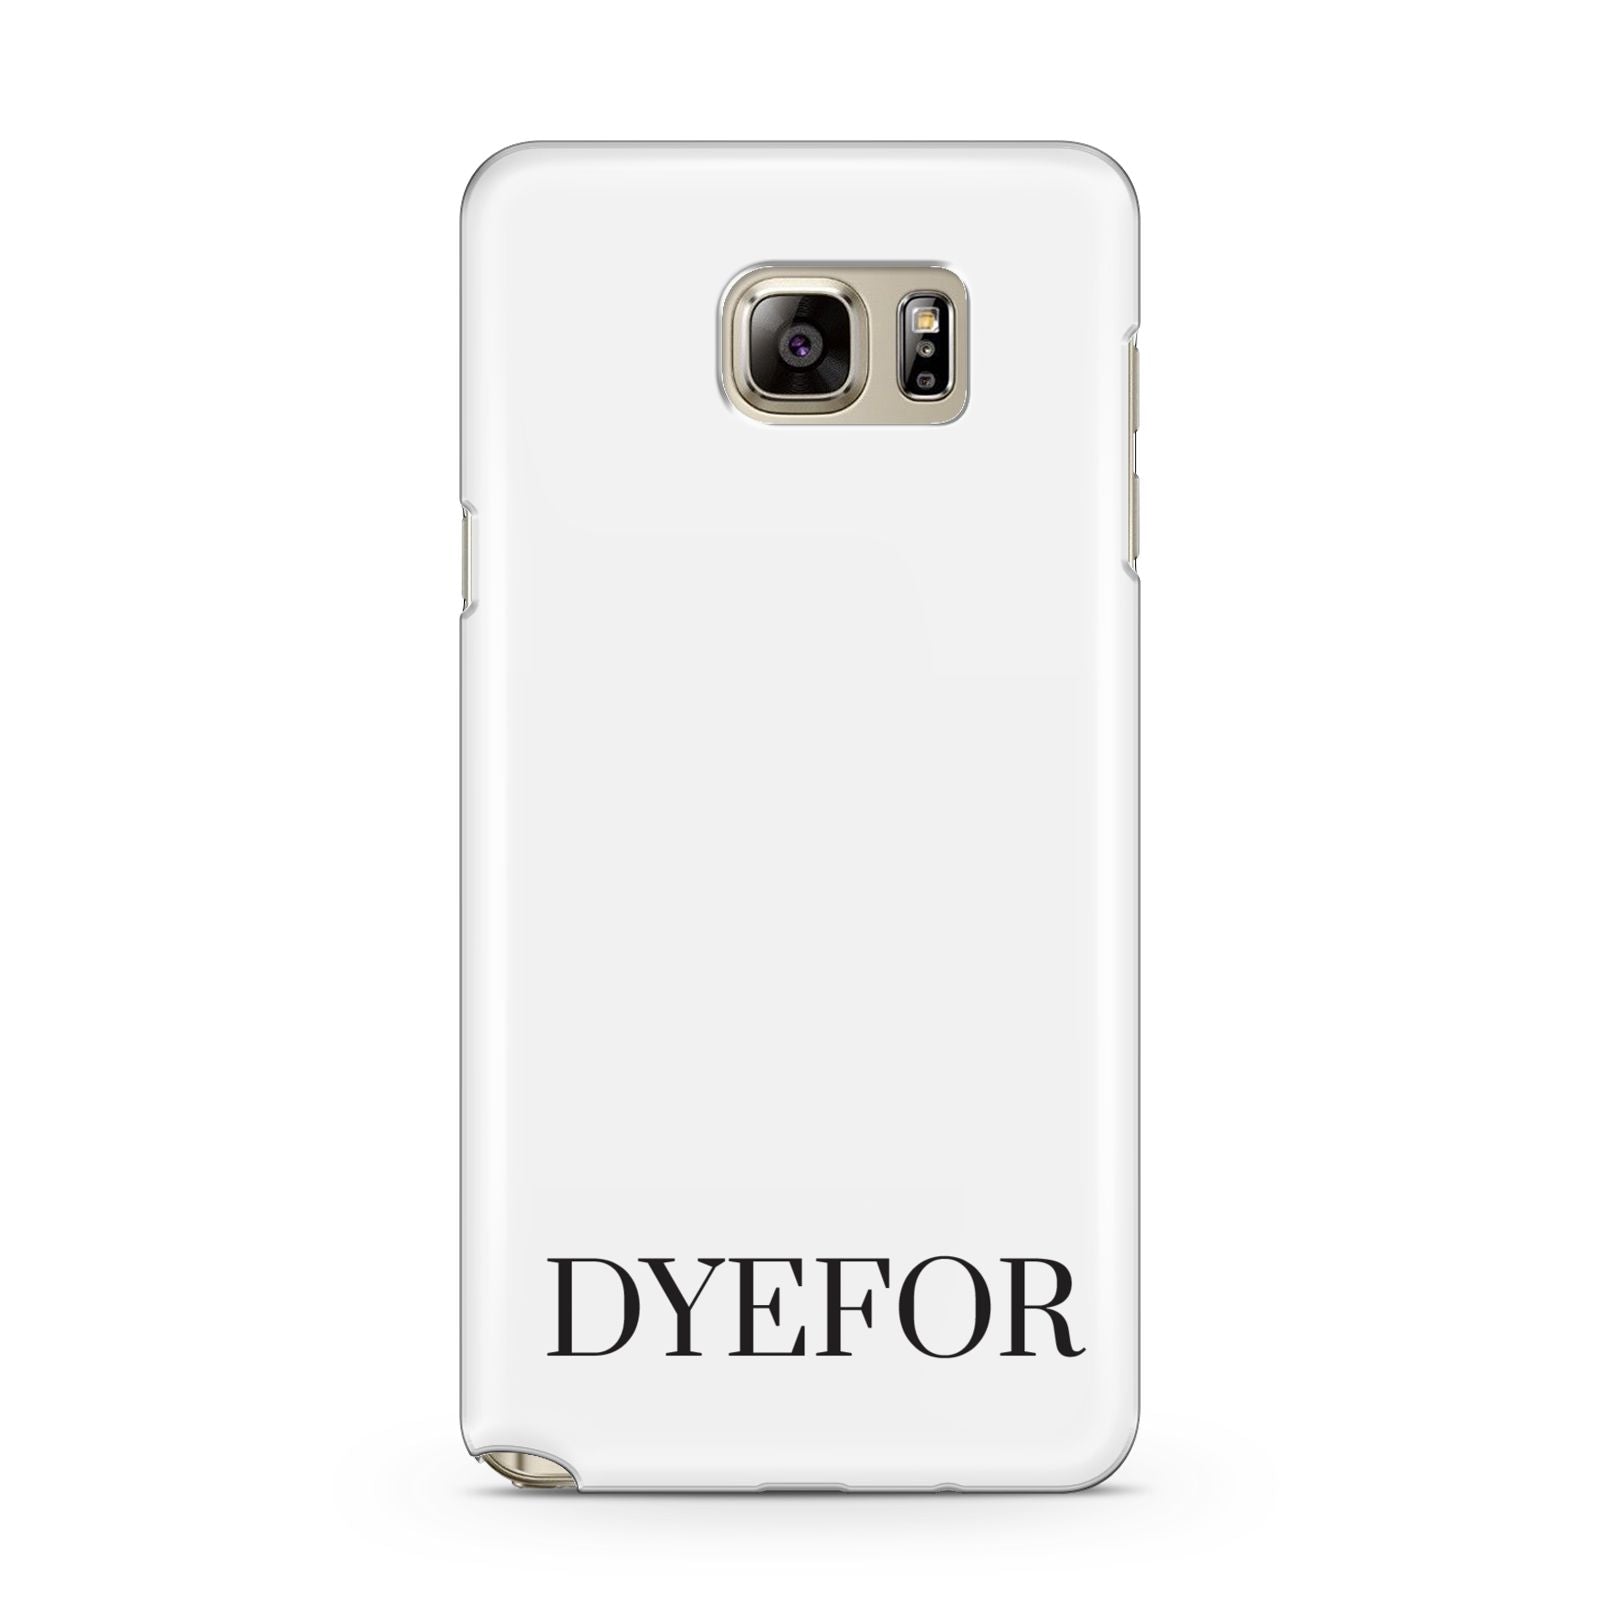 Name Personalised White Samsung Galaxy Note 5 Case